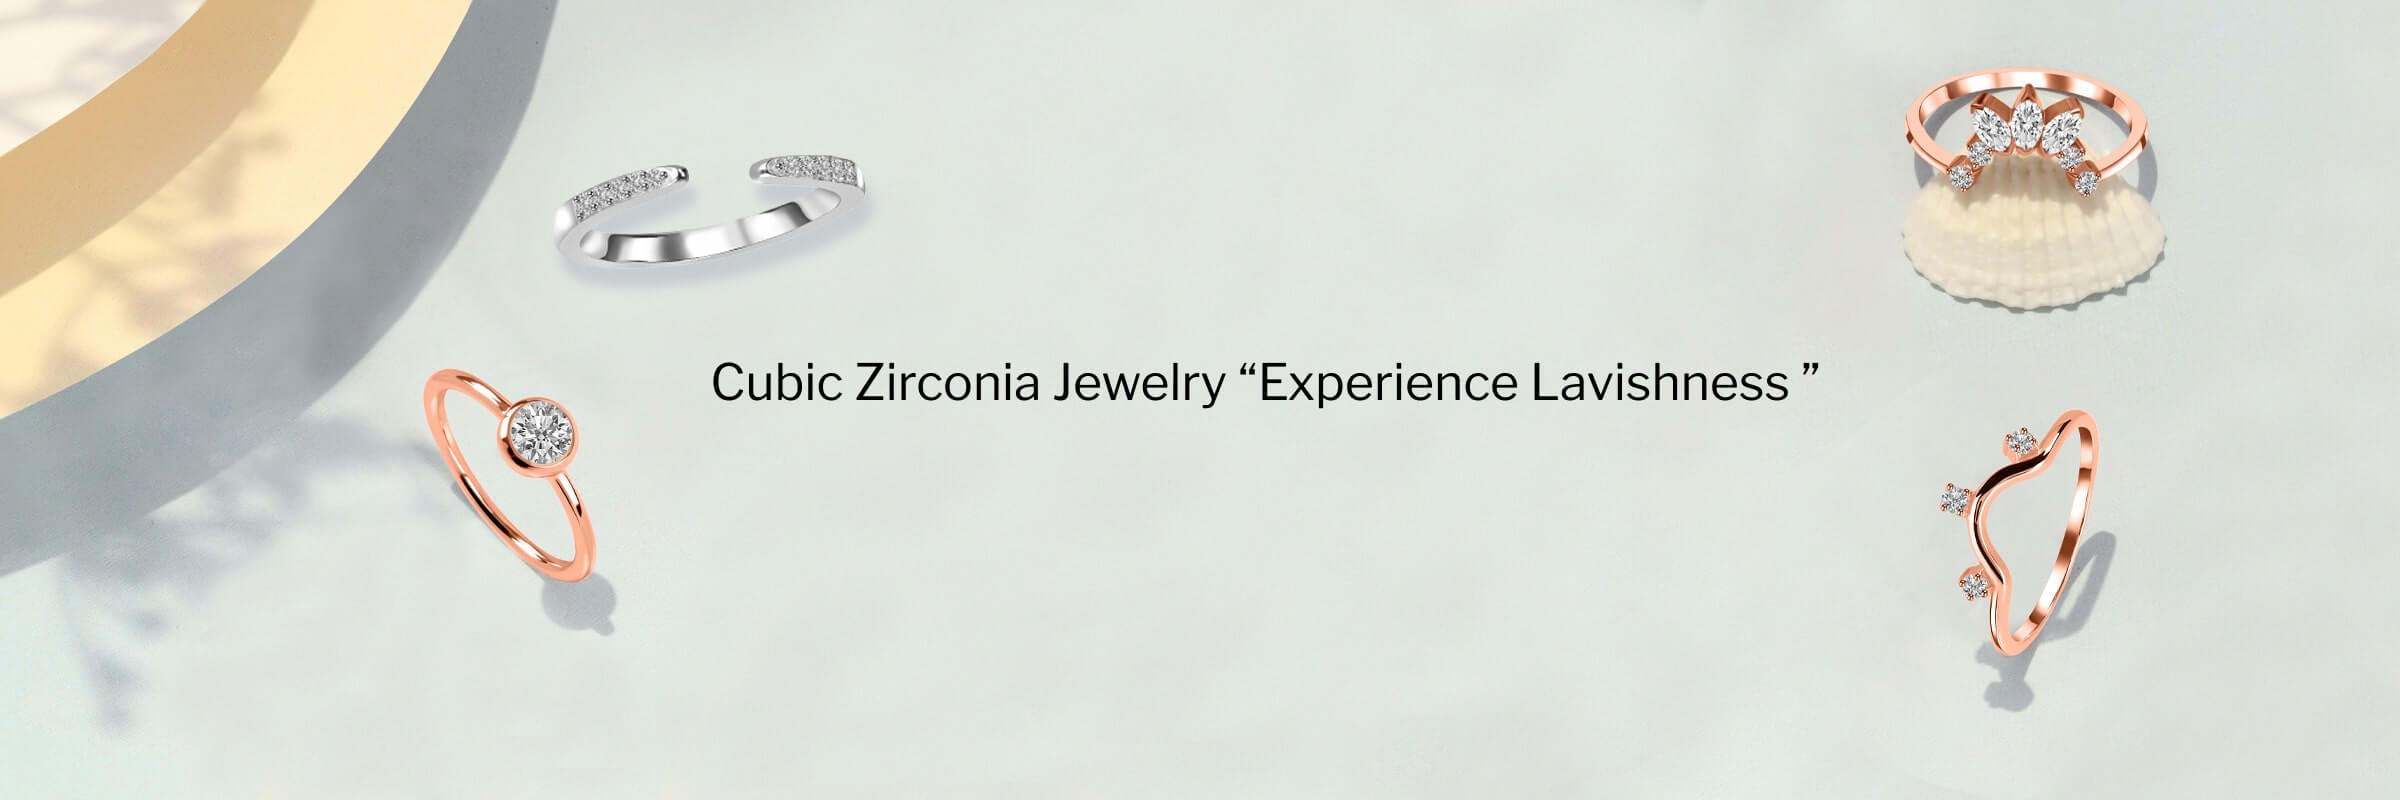 Dazzling Simplicity: Cubic Zirconia Jewelry for Affordable Elegance 1